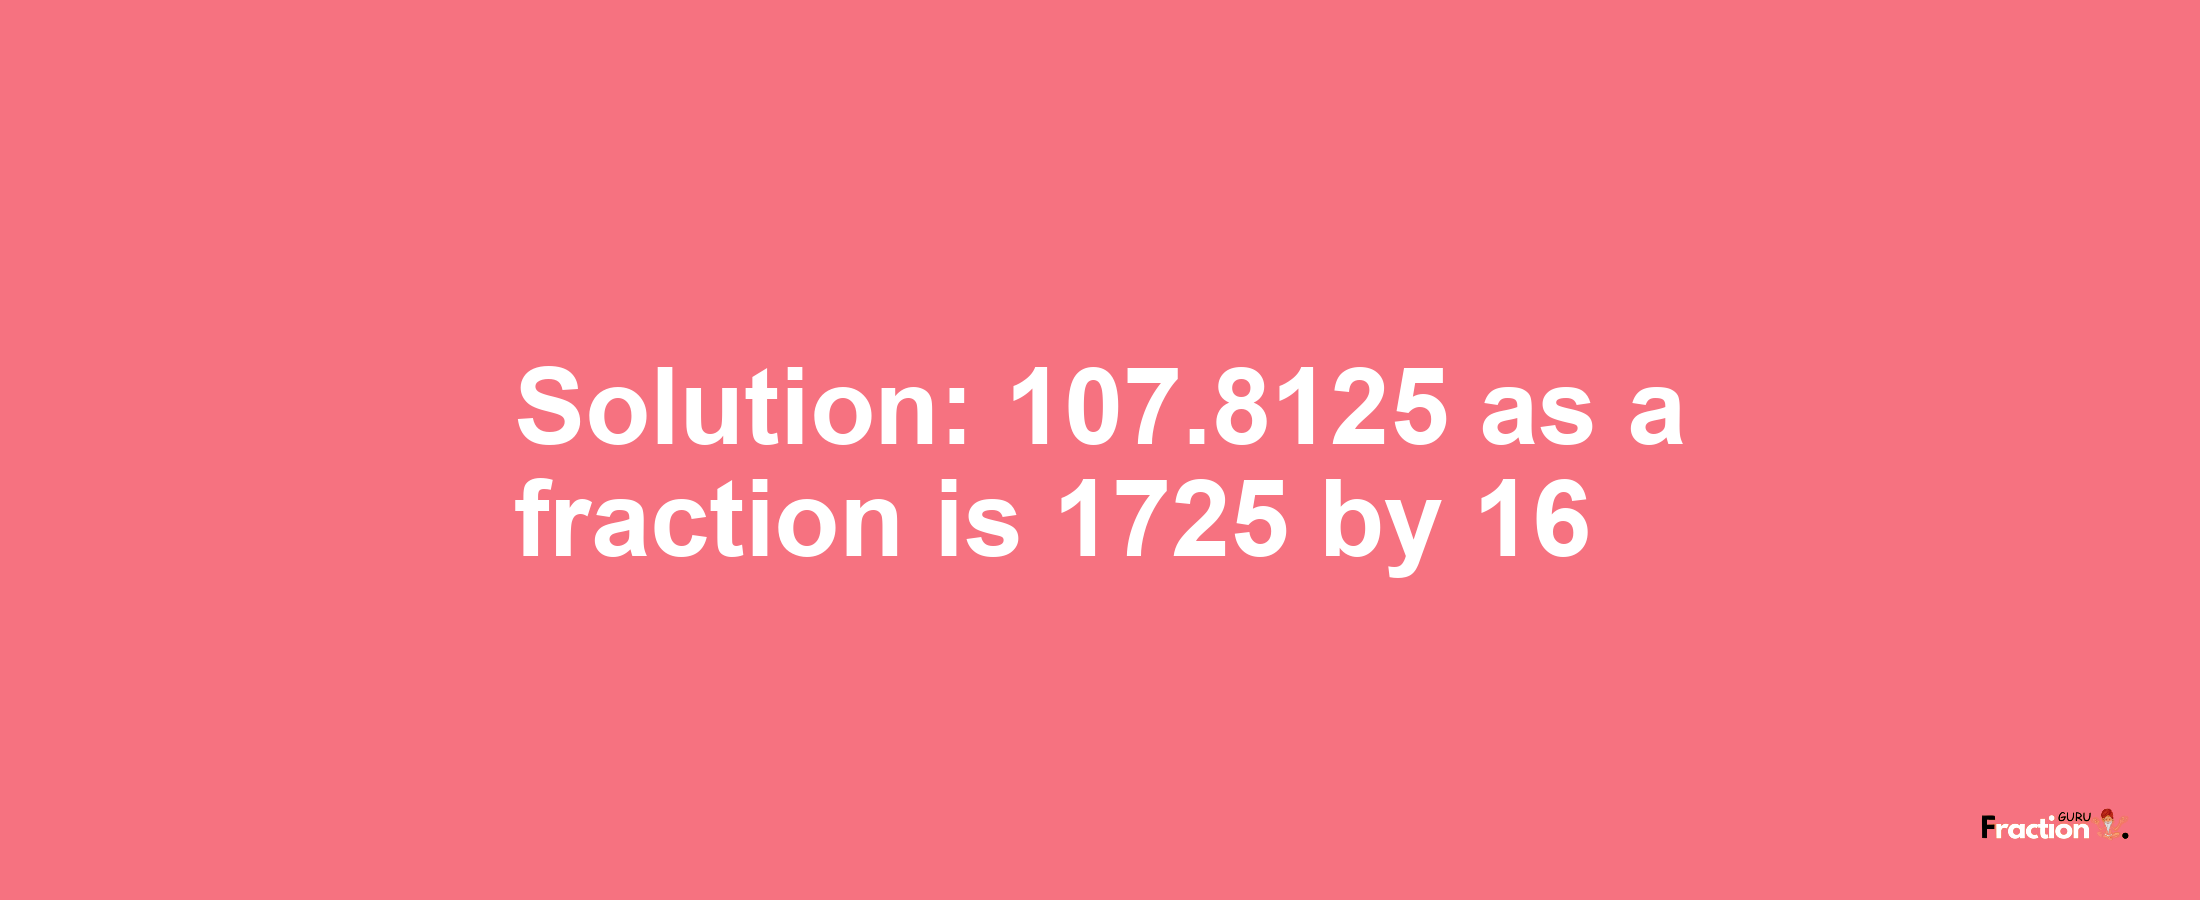 Solution:107.8125 as a fraction is 1725/16